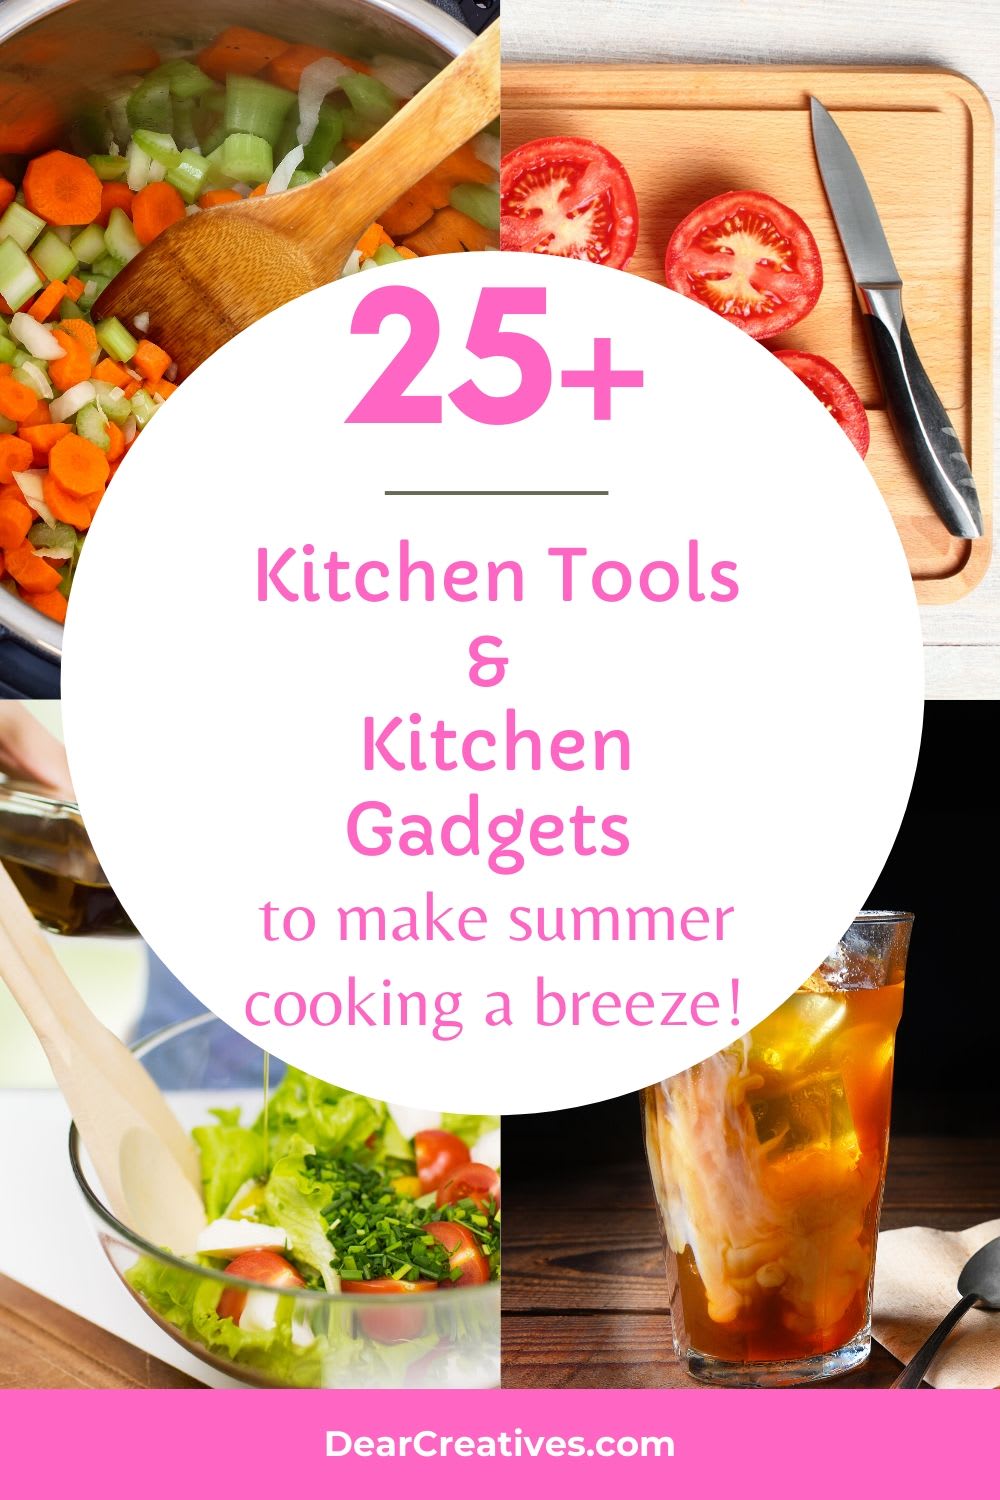 Kitchen Tools For Summer - Make Cooking A Breeze!